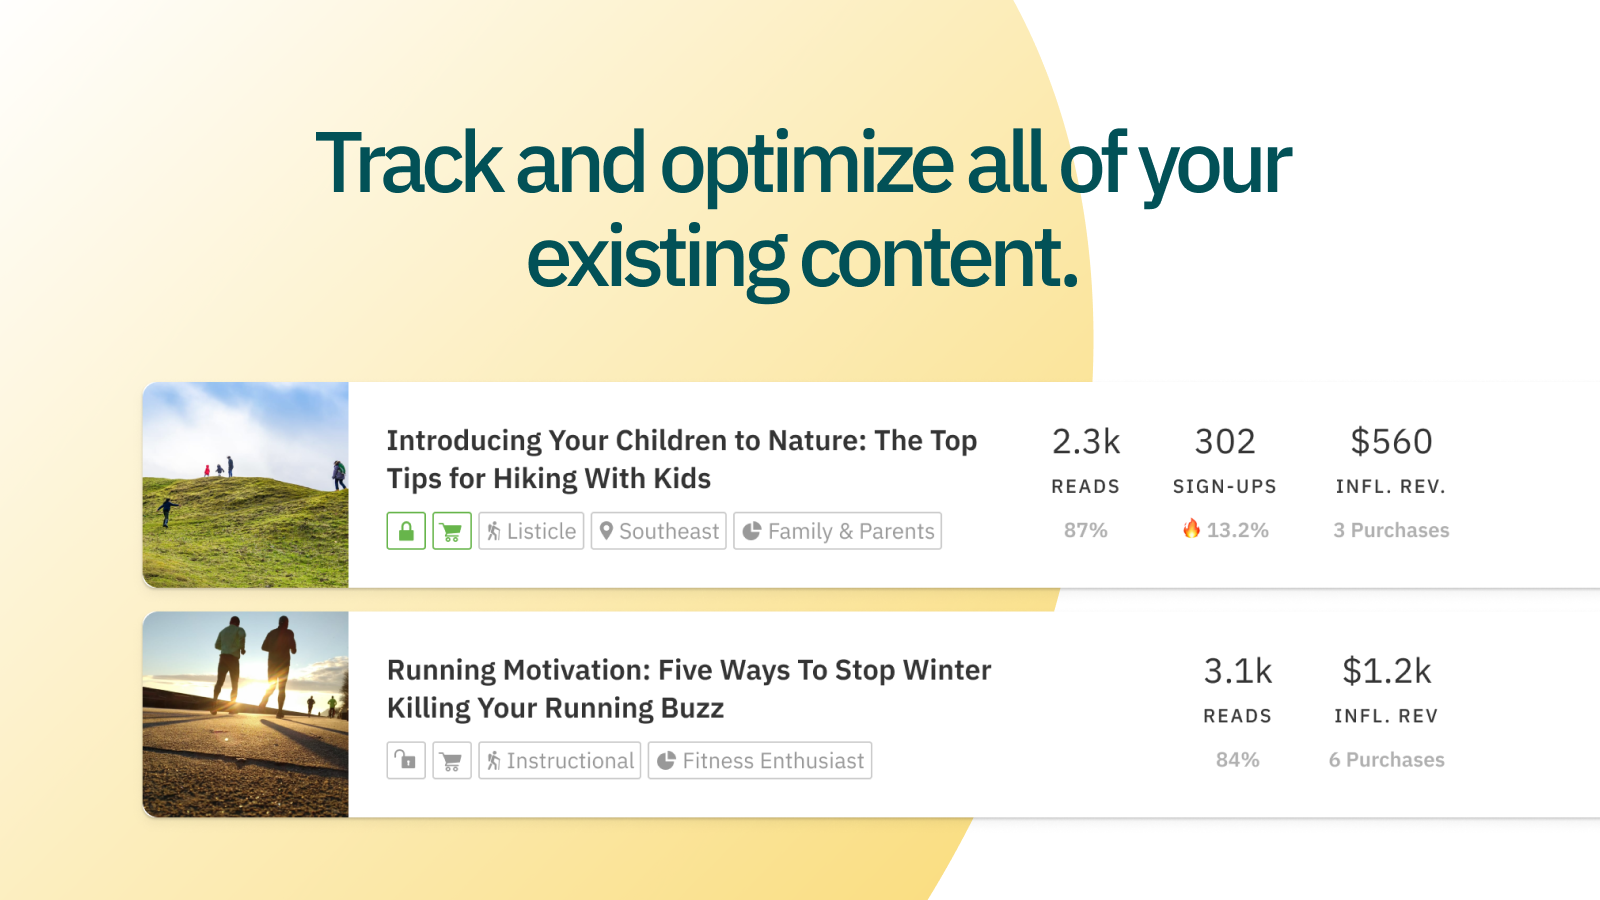 Centralize, track, and optimize all your existing content.